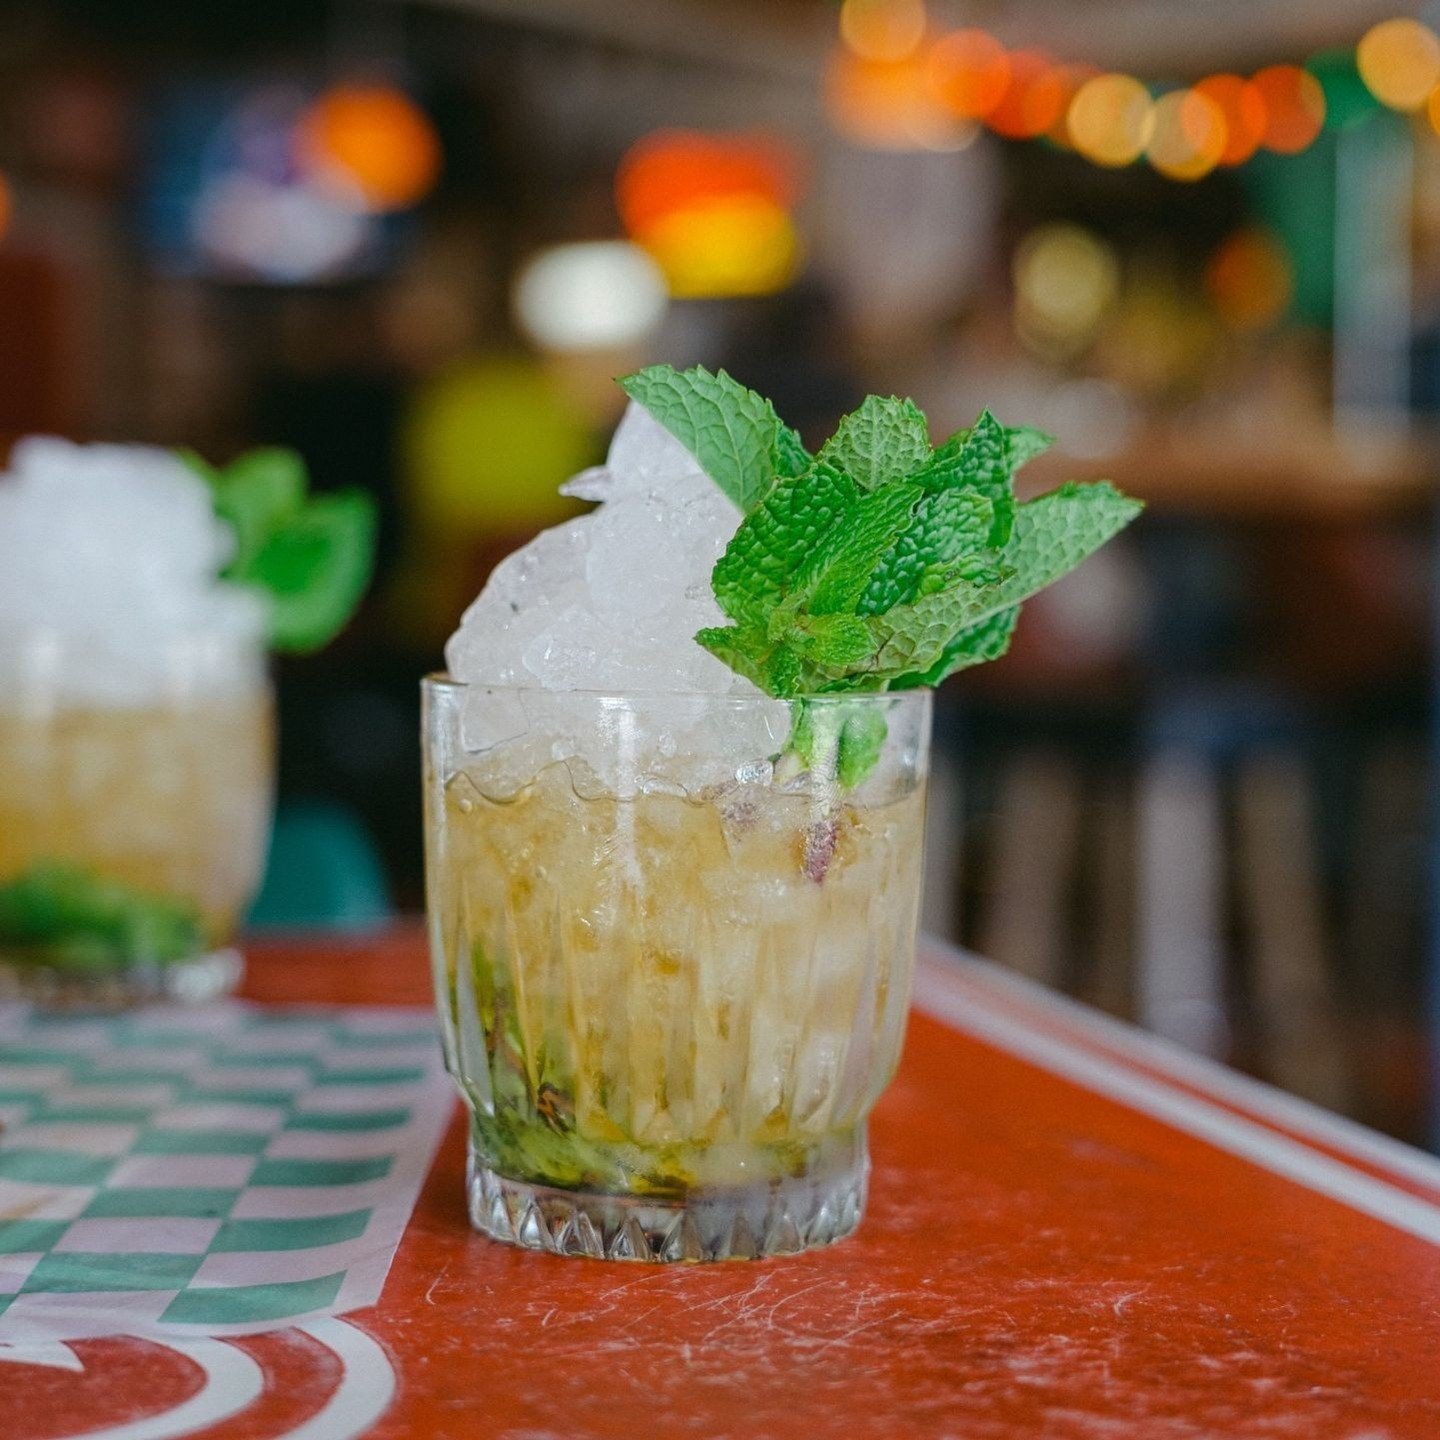 We make a mean mint julep, and you already know about those margaritas. Take it EZ with us this weekend. Swing by on Saturday to watch the Kentucky Derby and drop in on Sunday to celebrate Cinco de Mayo!⁠
⁠
📸: @mikahdanaephoto